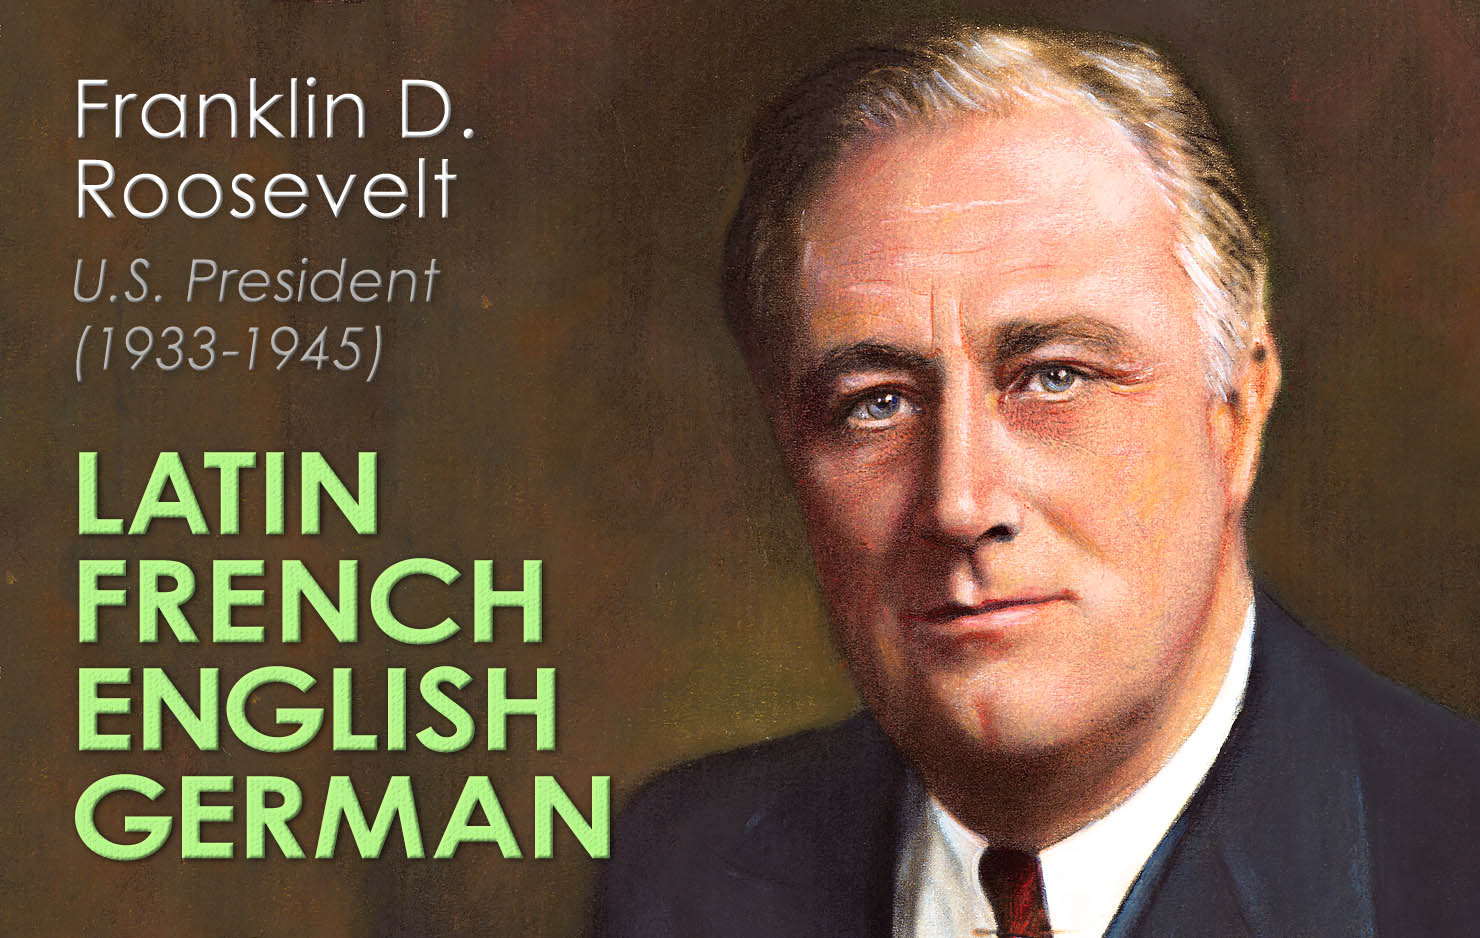 Franklin Delano Roosevelt was raised speaking German and French. Though he never had a mastery of the language, he also learned a limited amount of Latin.